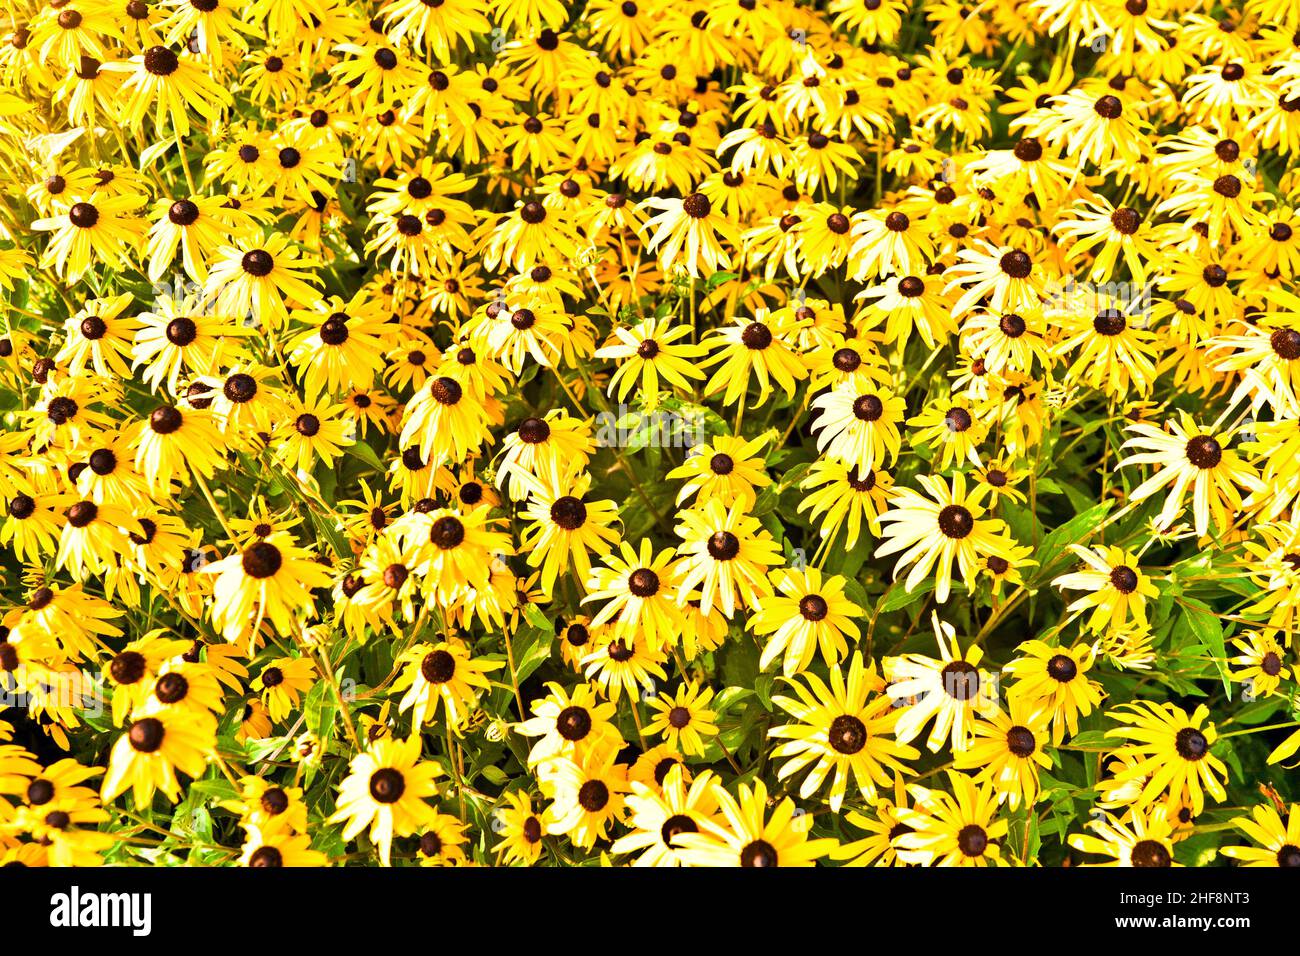 yellow cut leaved coneflower prospers in the bed Stock Photo